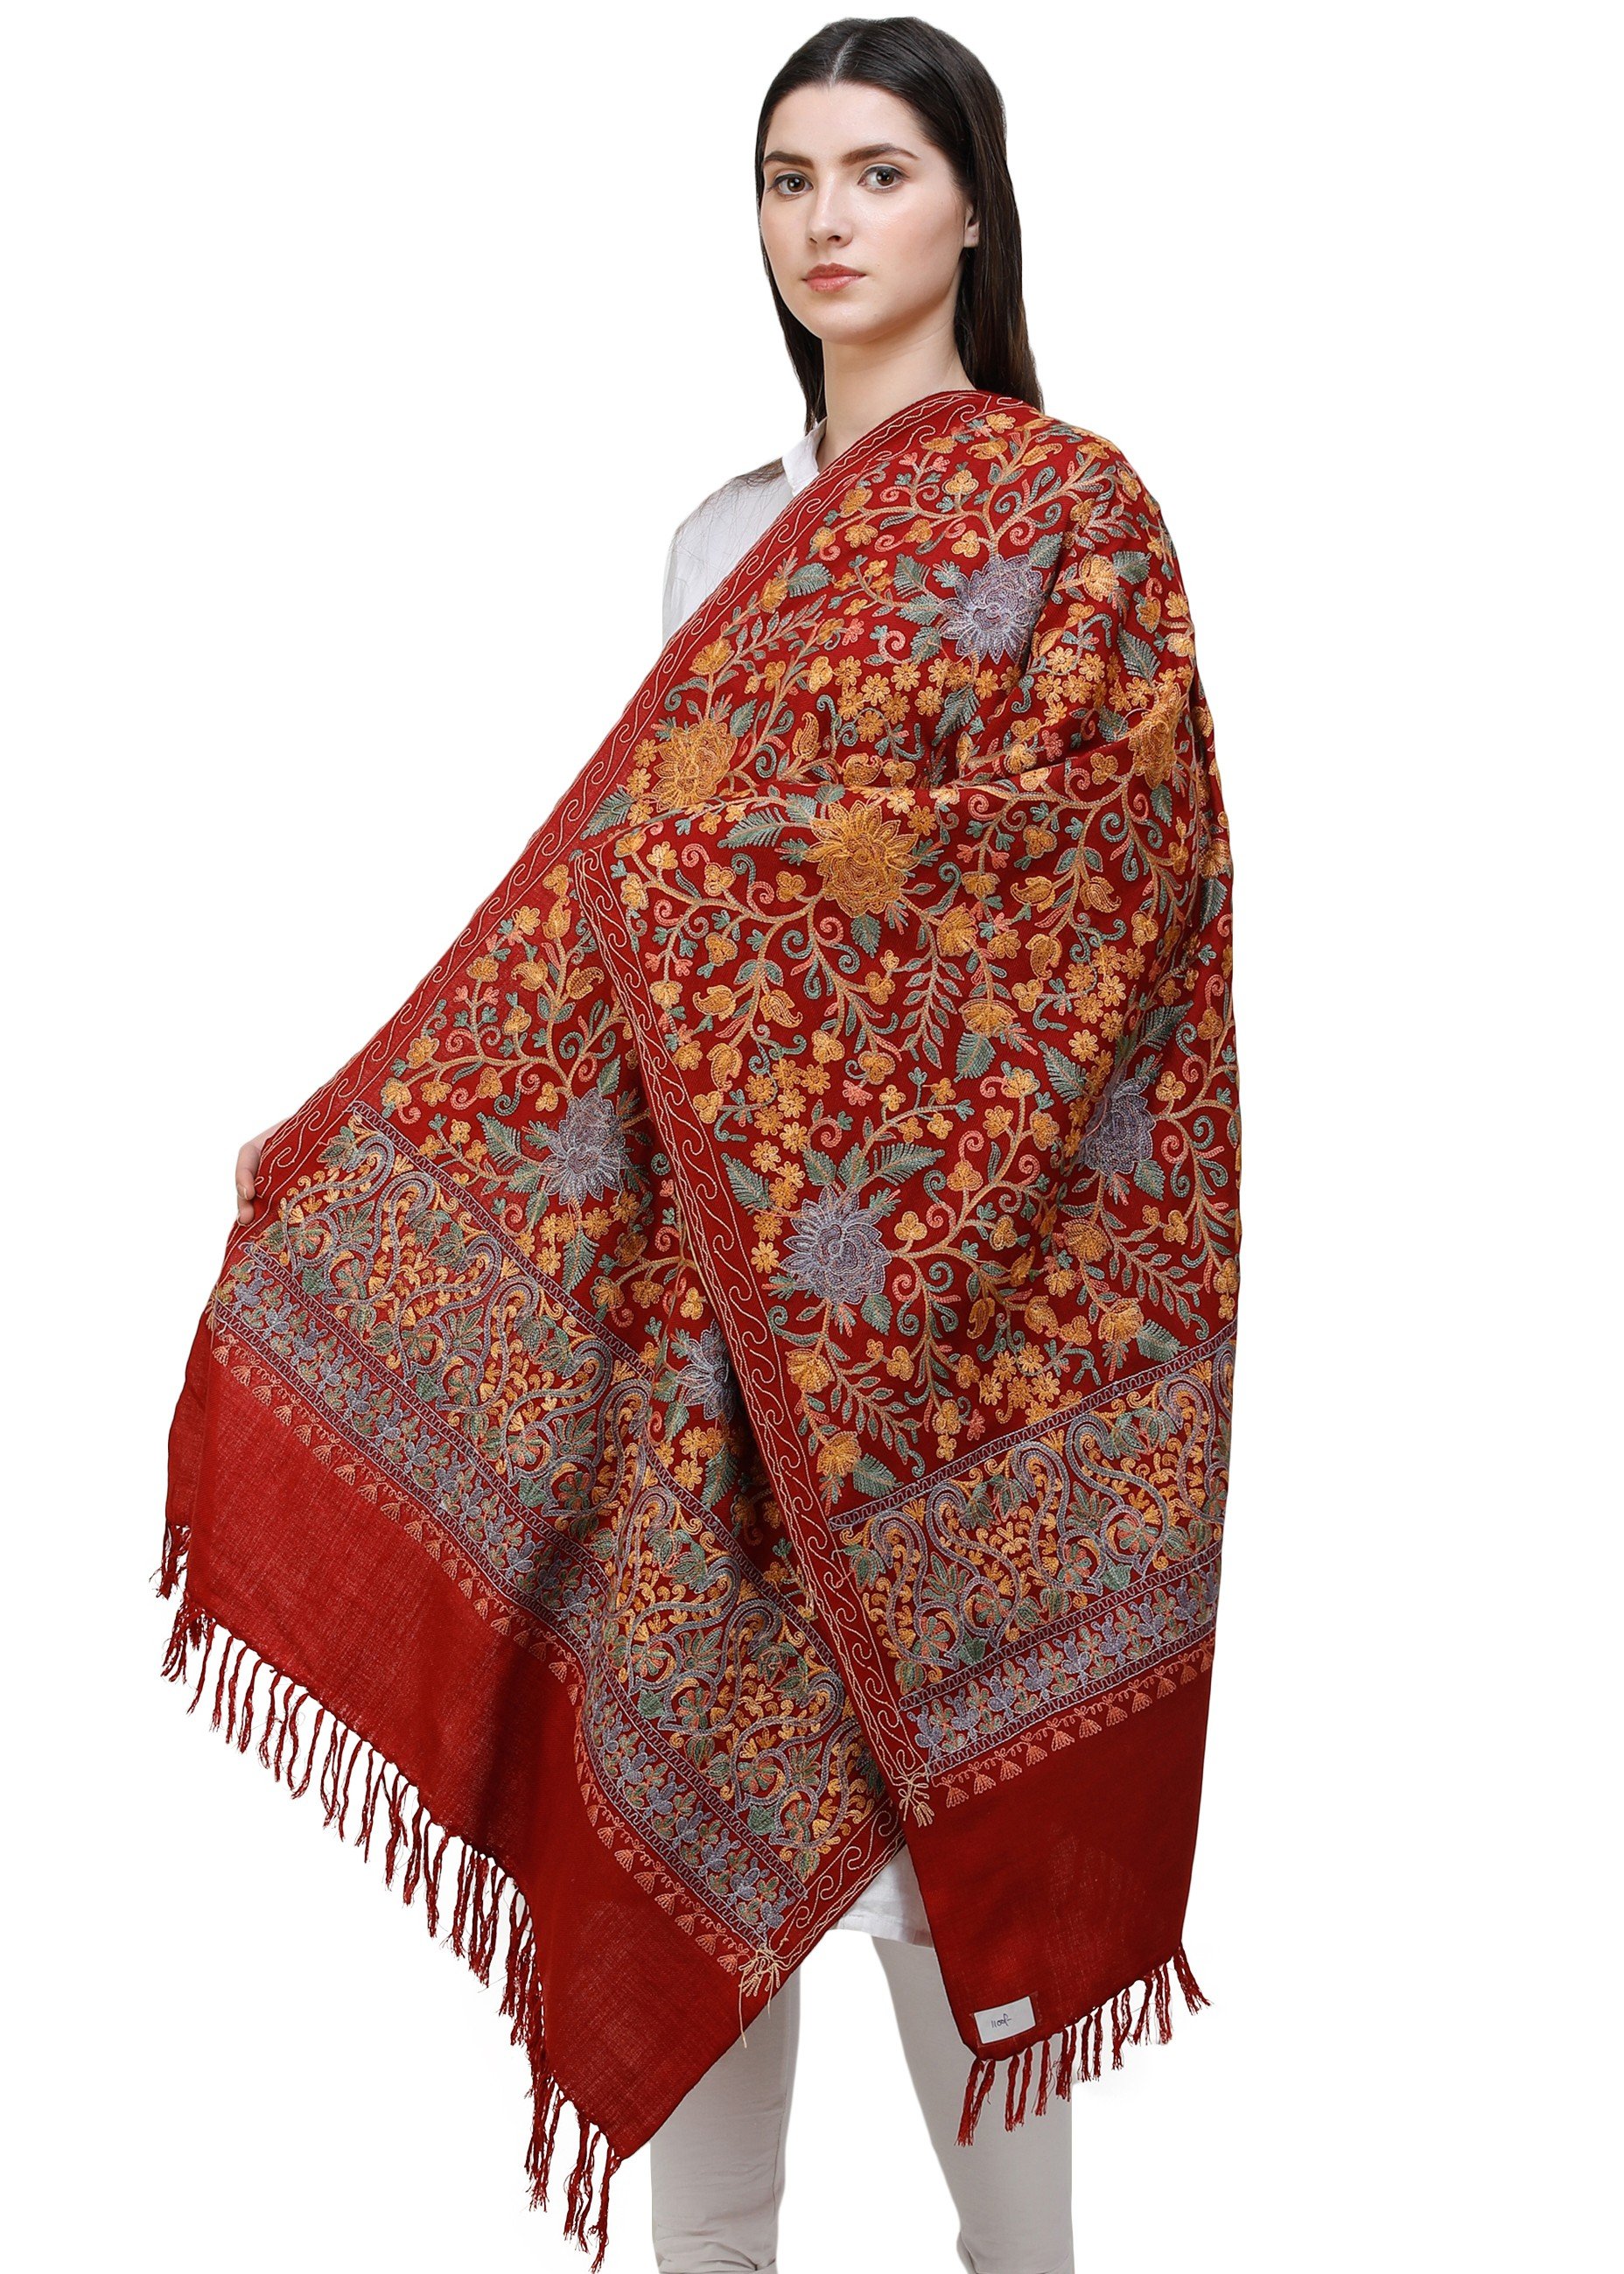 Karanda Red Shawls from Amritsar with Ari Embroidered Flowers Allover